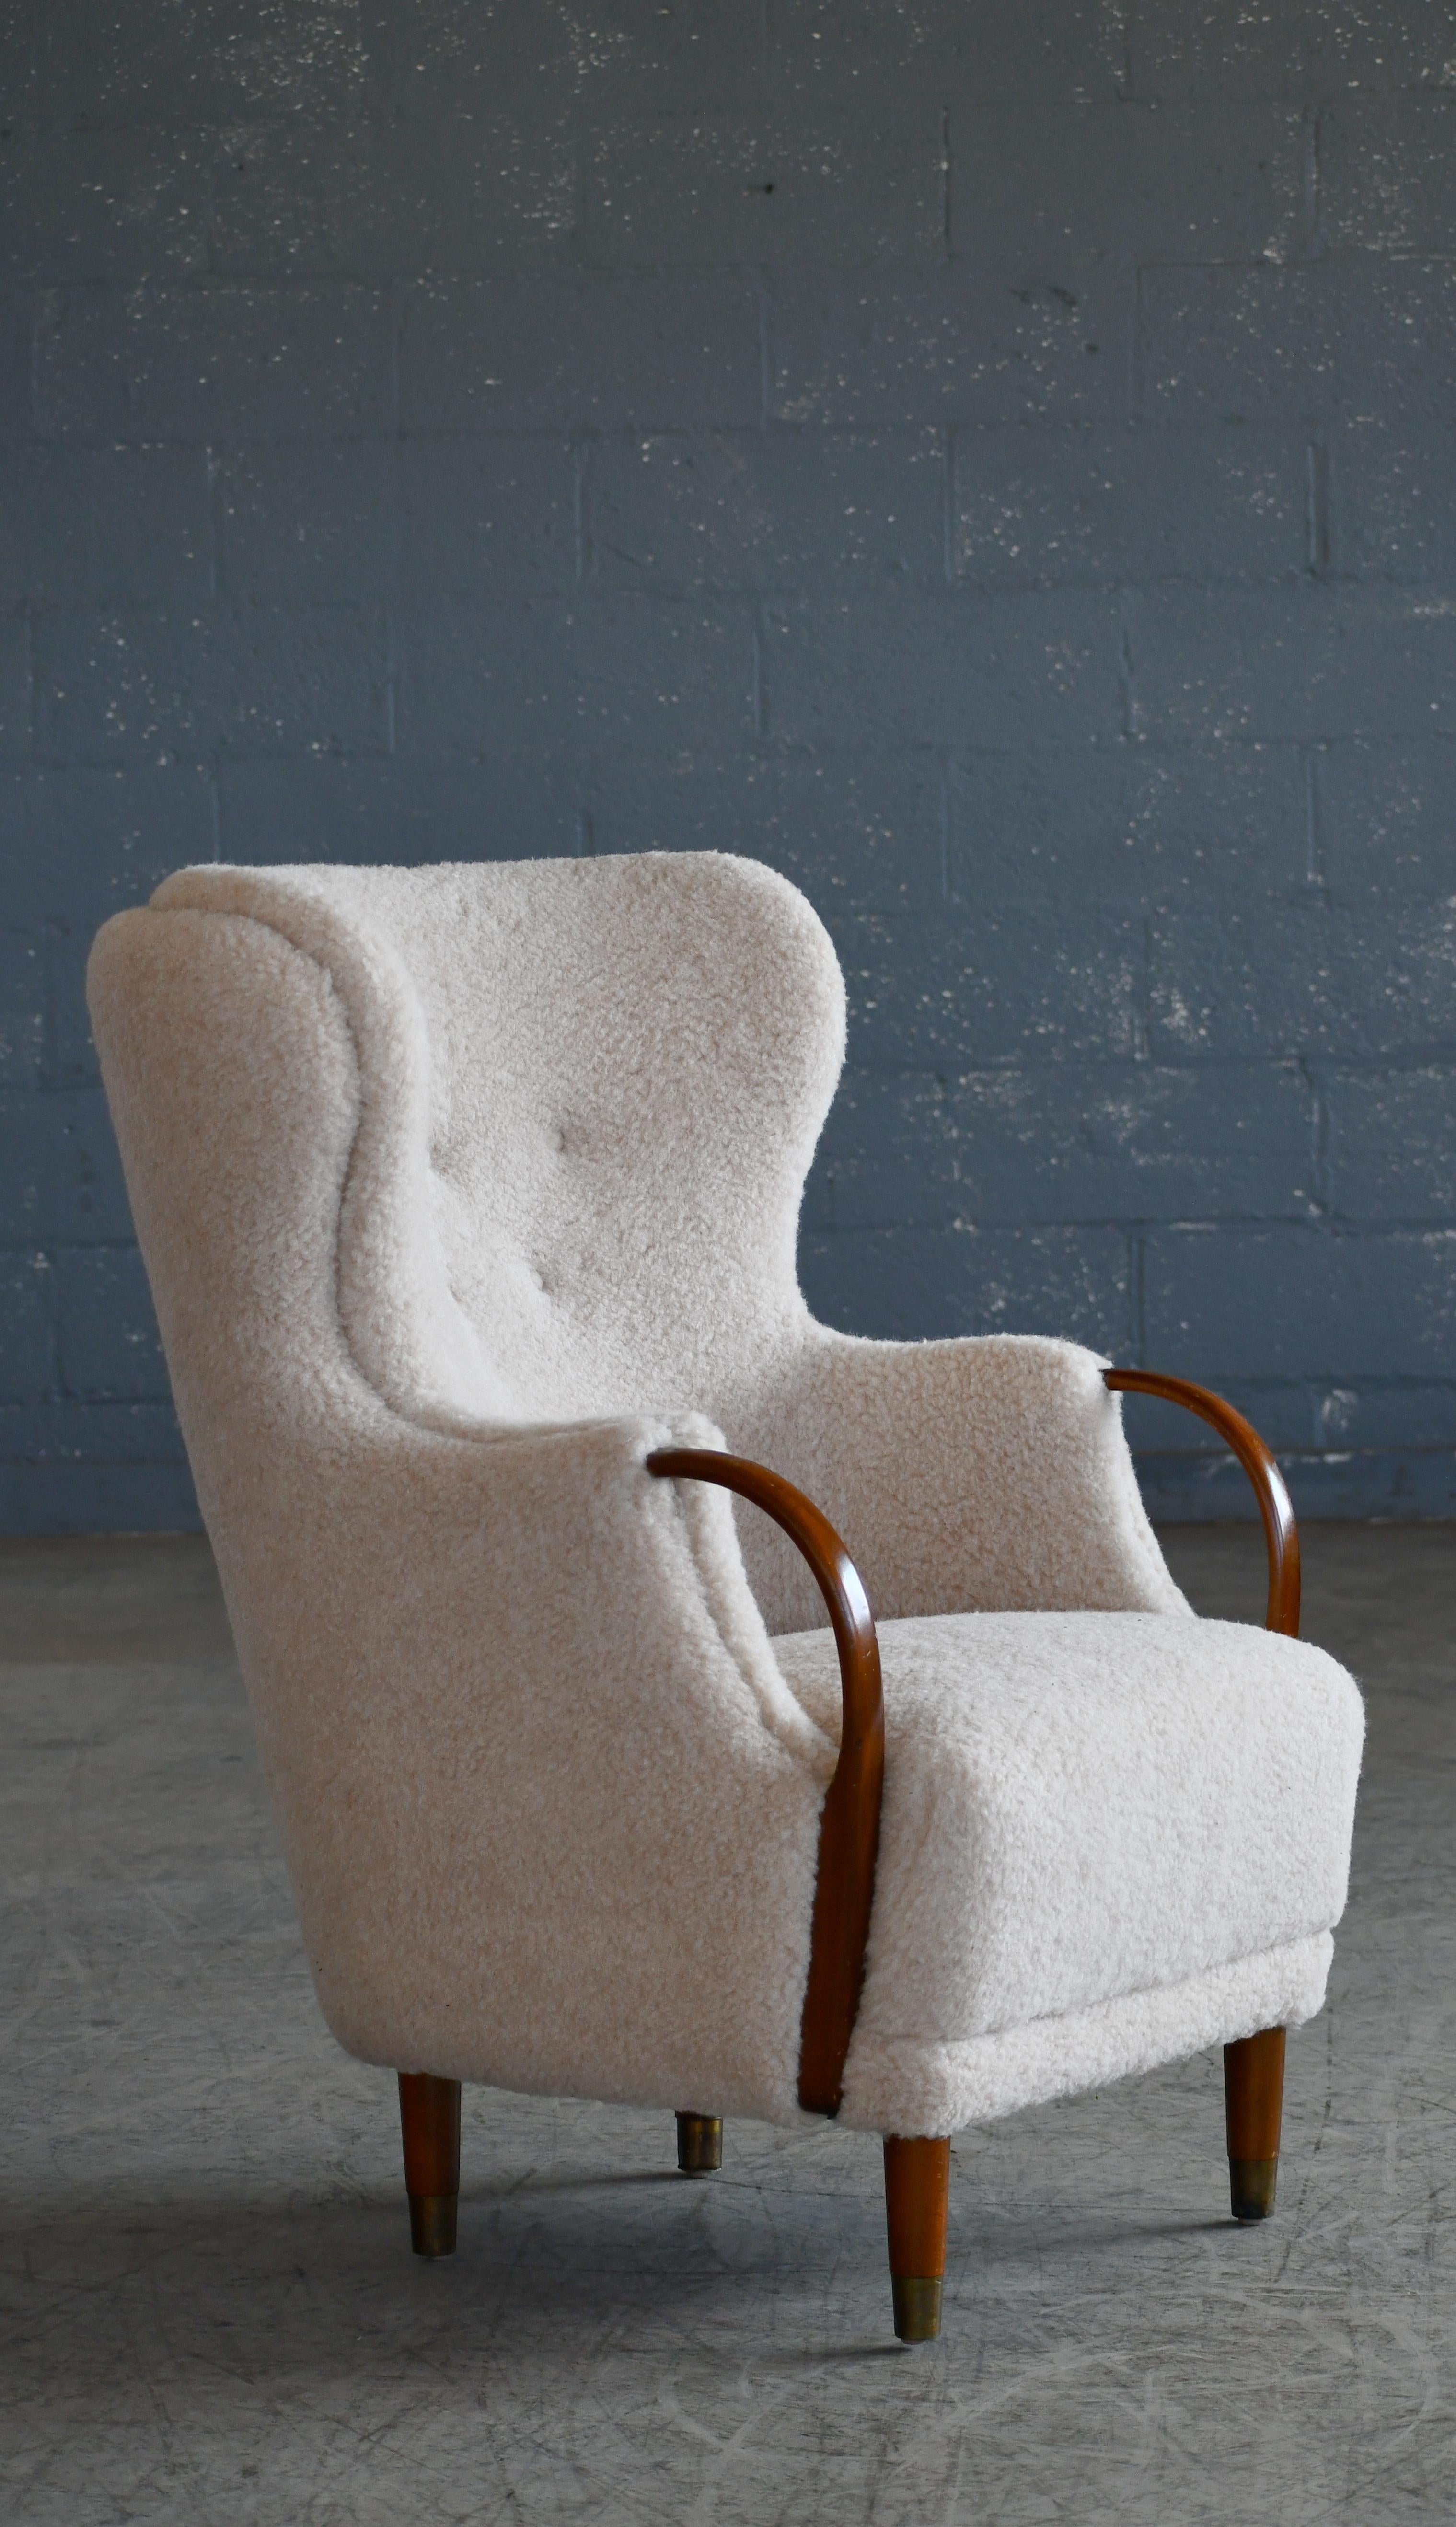 Mid-20th Century Danish Lounge Chair with Open Armrests Upholstered in Beige lambswool by Bramin